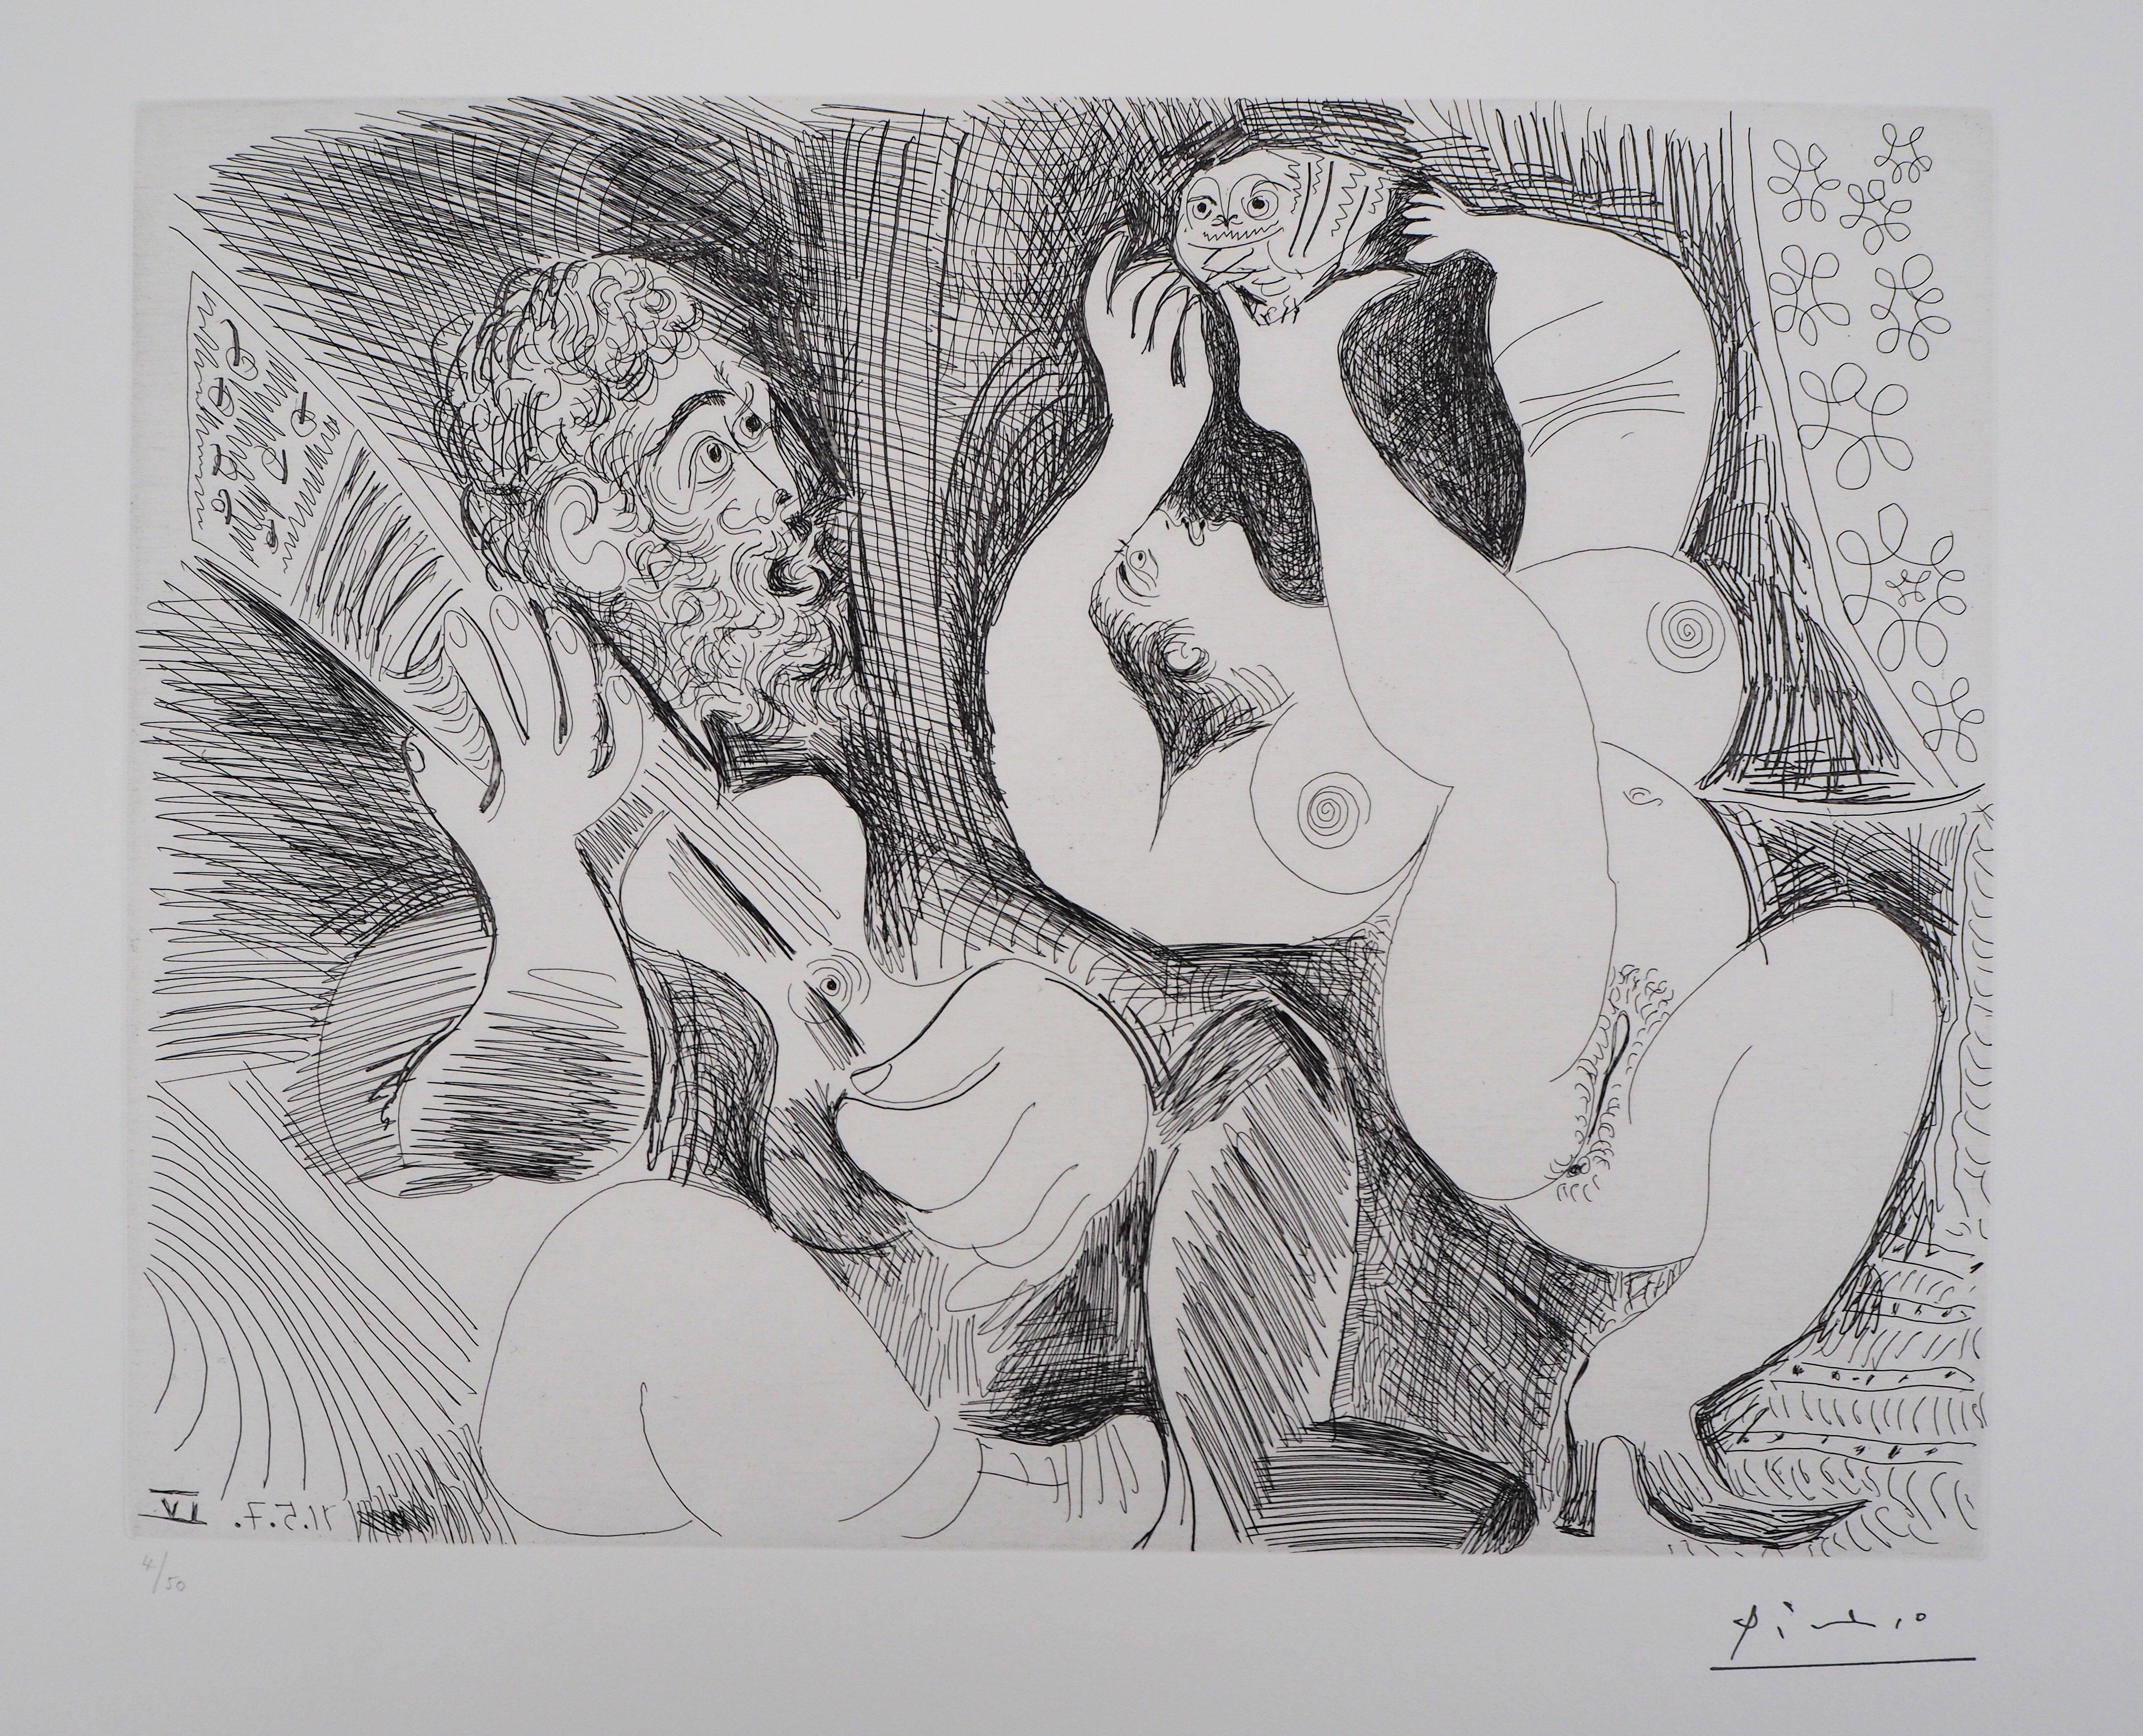 Pablo Picasso Figurative Print - Dancer, Musician and a Owl - Original signed Etching - Limited to 50 copies